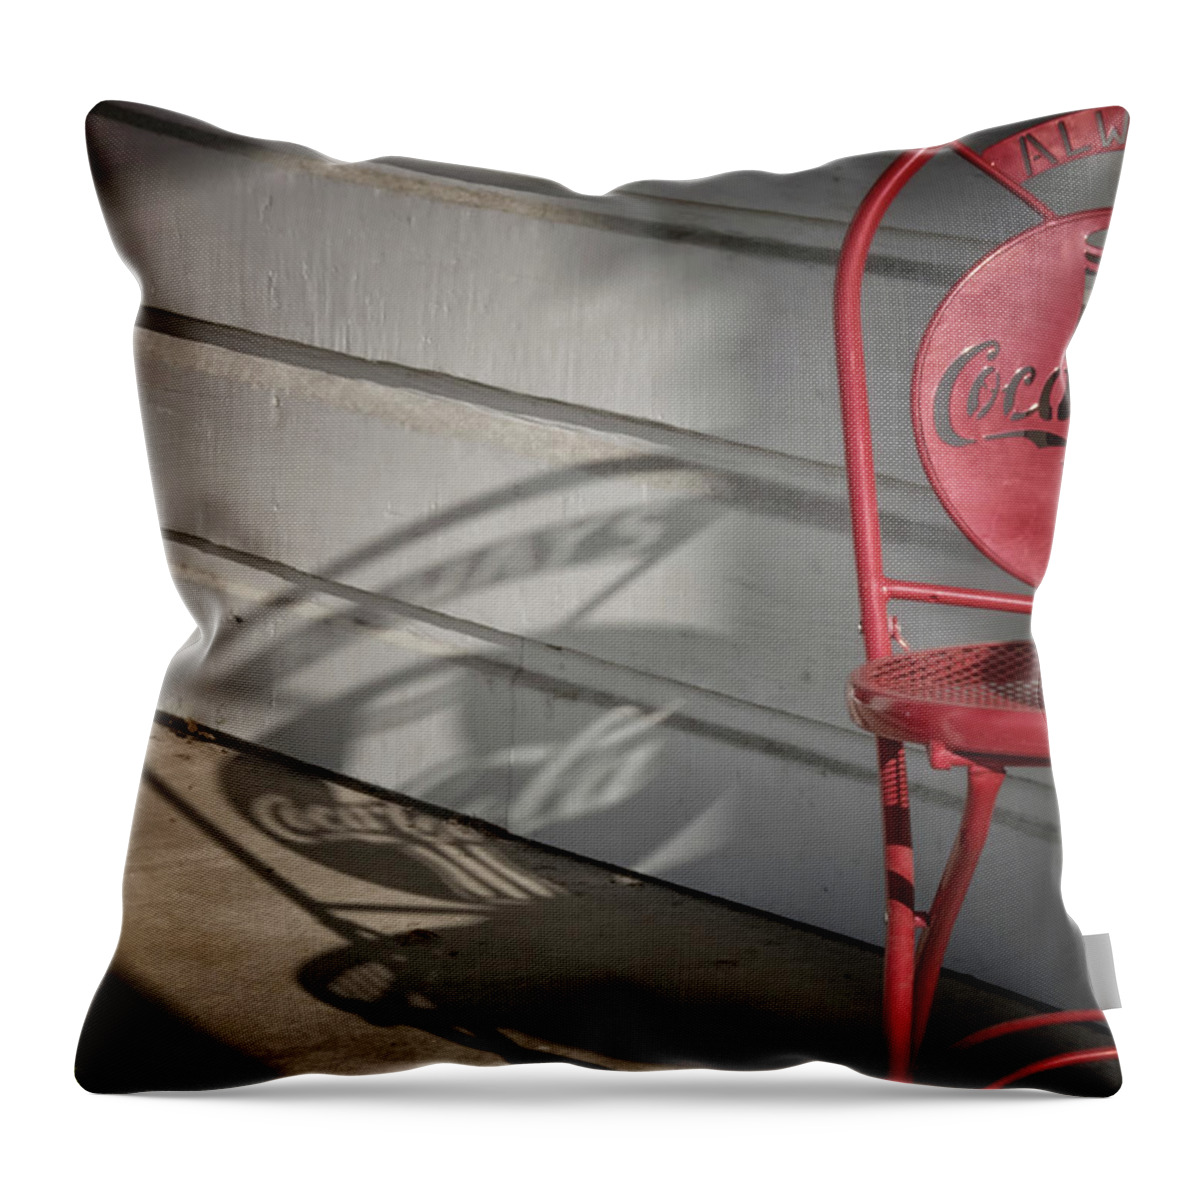 Coca Cola Throw Pillow featuring the photograph Always Coke by Jessica Levant